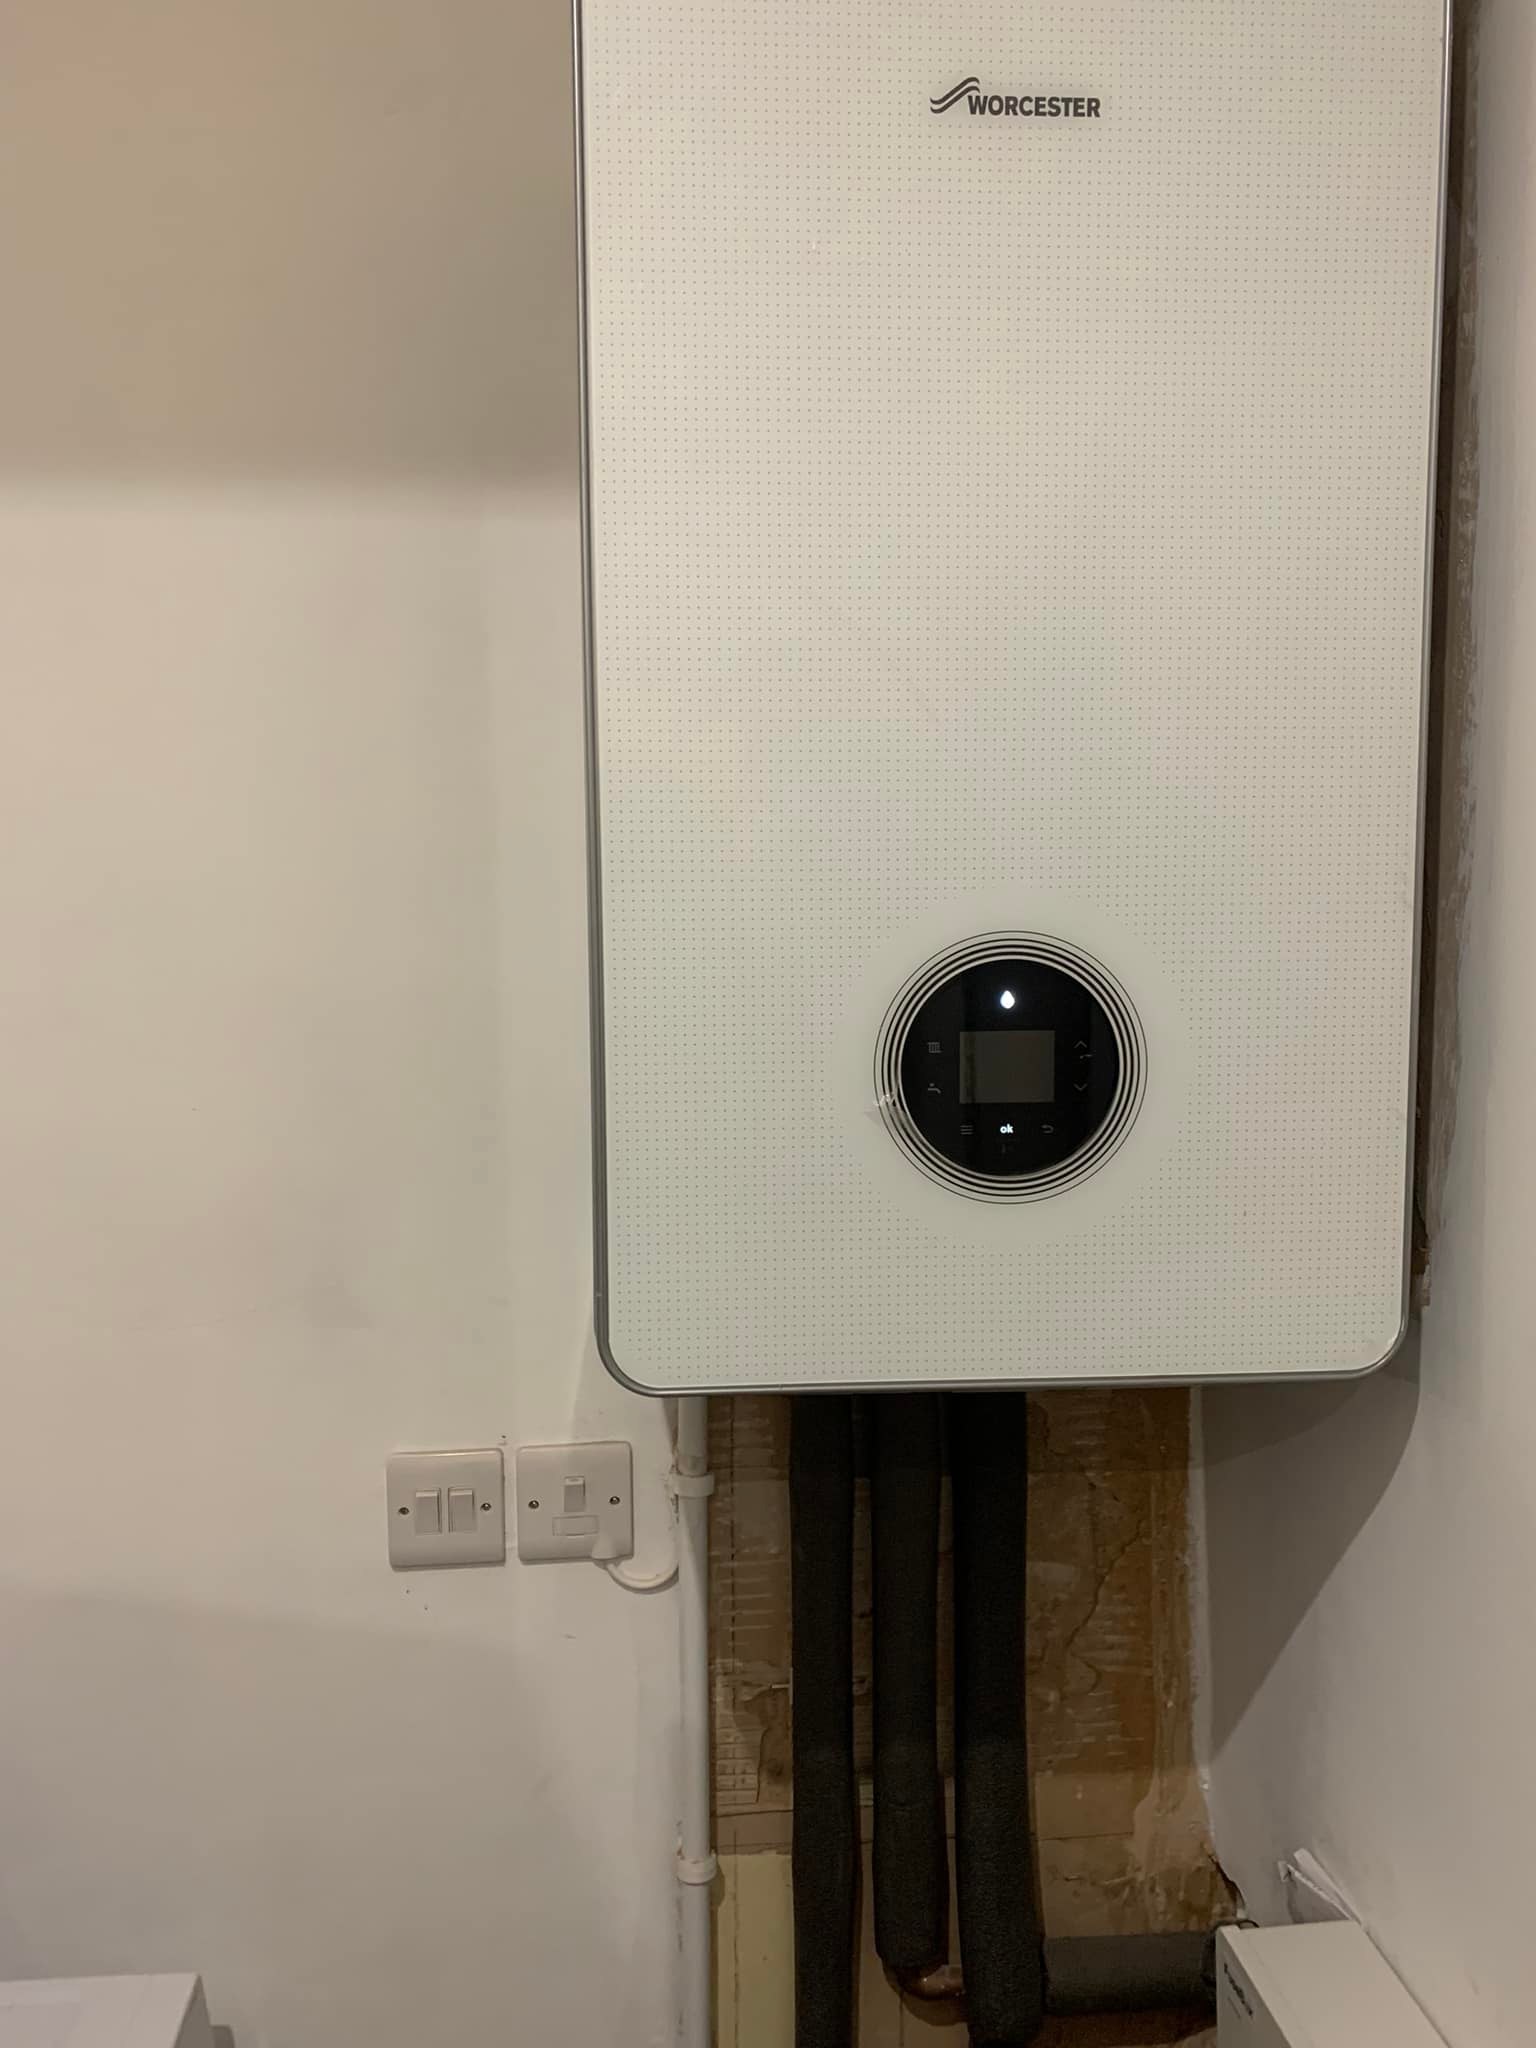 Worcester boiler mounted to wall